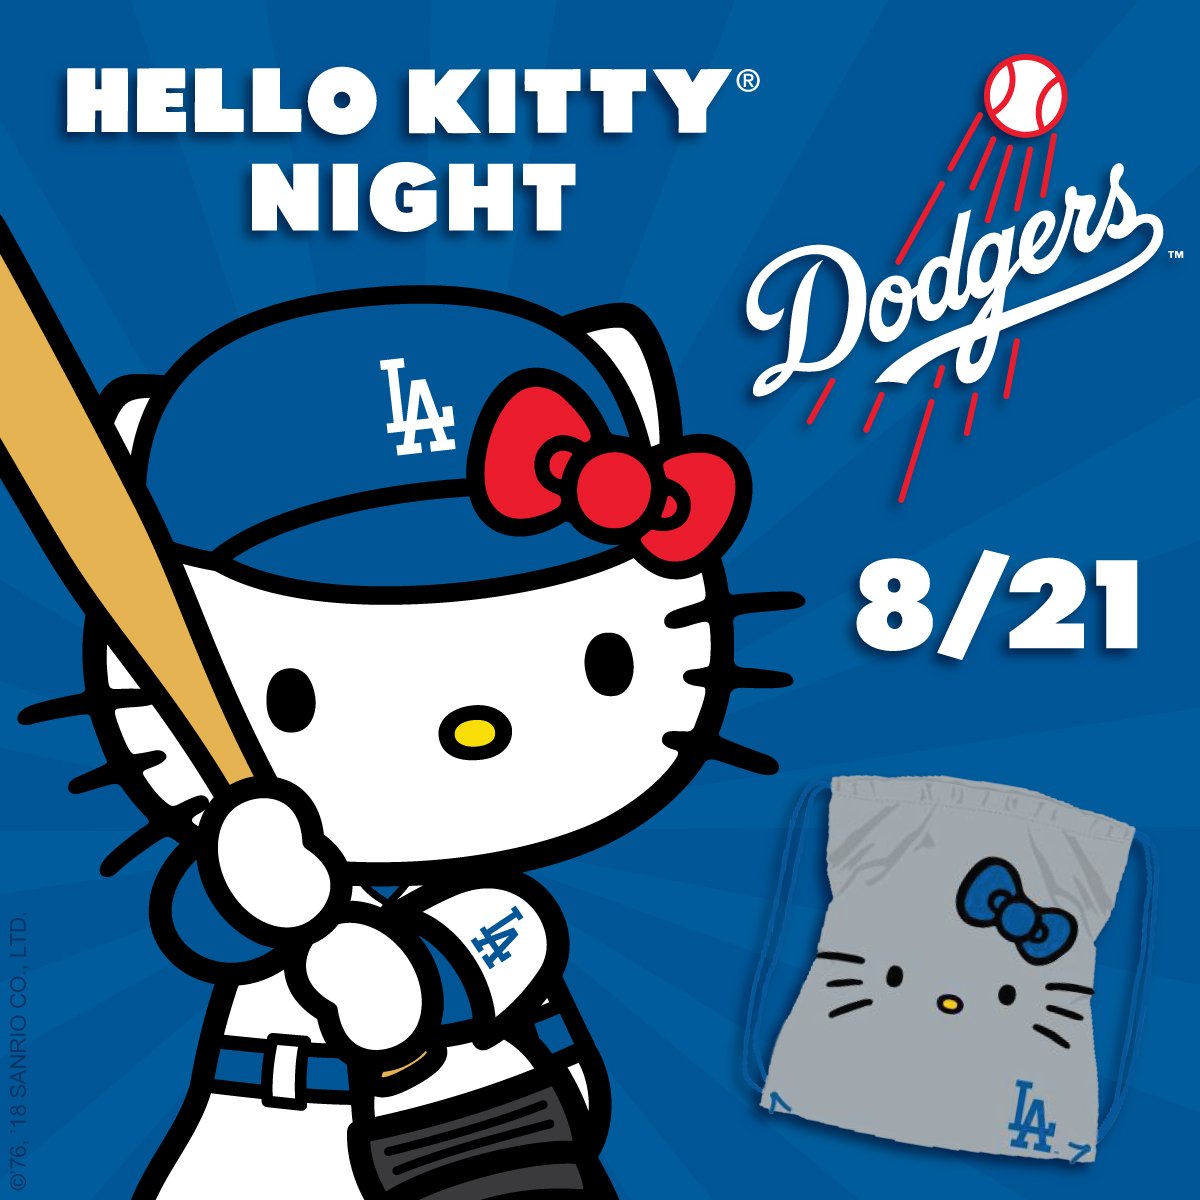 Hello Kitty on X: Batter up! #HelloKitty will be joining the Los Angeles @ Dodgers at the ball game on Tuesday, August 21st! This supercute Hello Kitty  x Dodgers drawstring tote bag comes